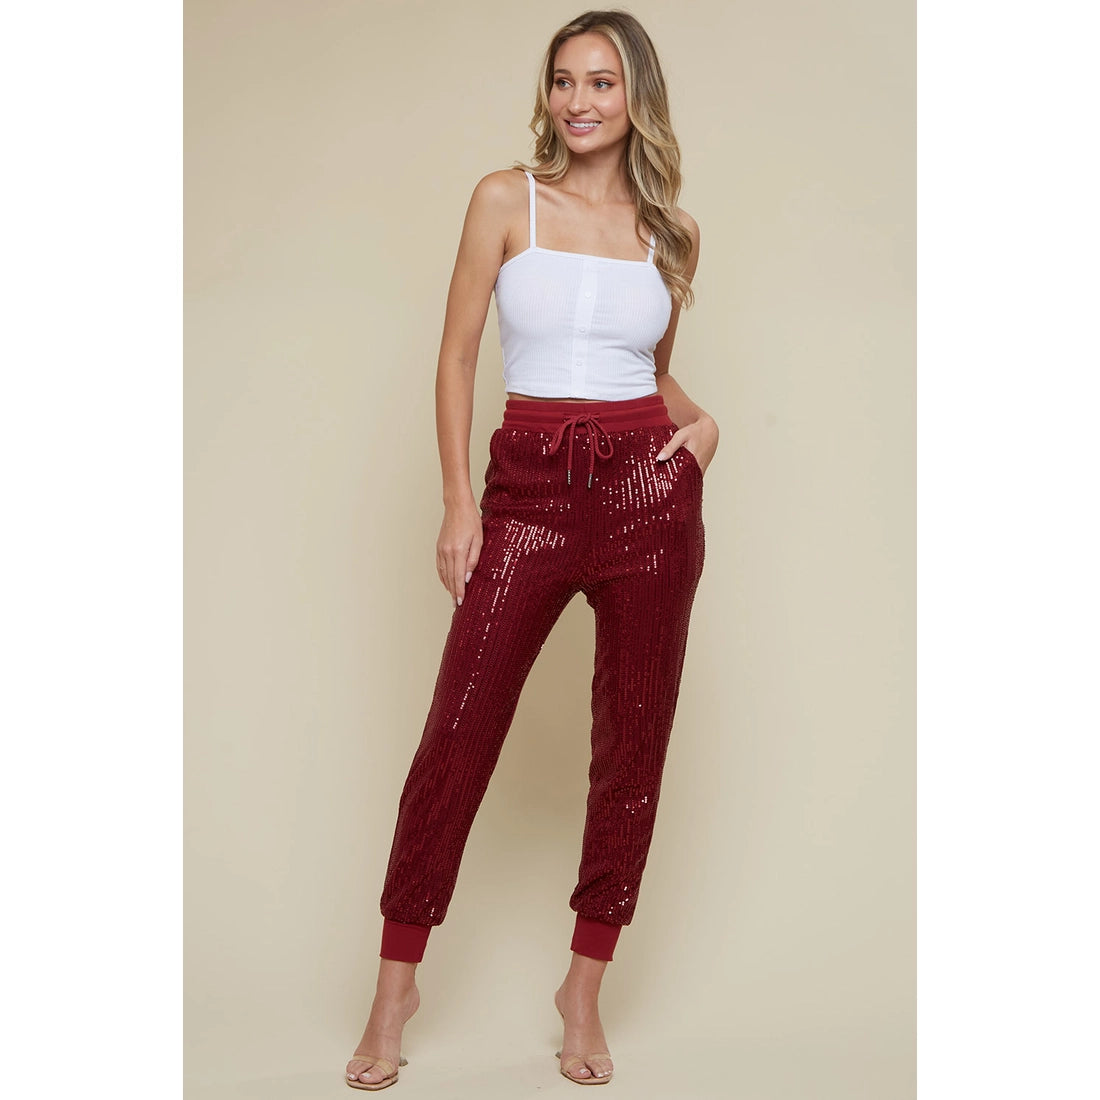 Stretchy Sequin Jogger Pants - Wine